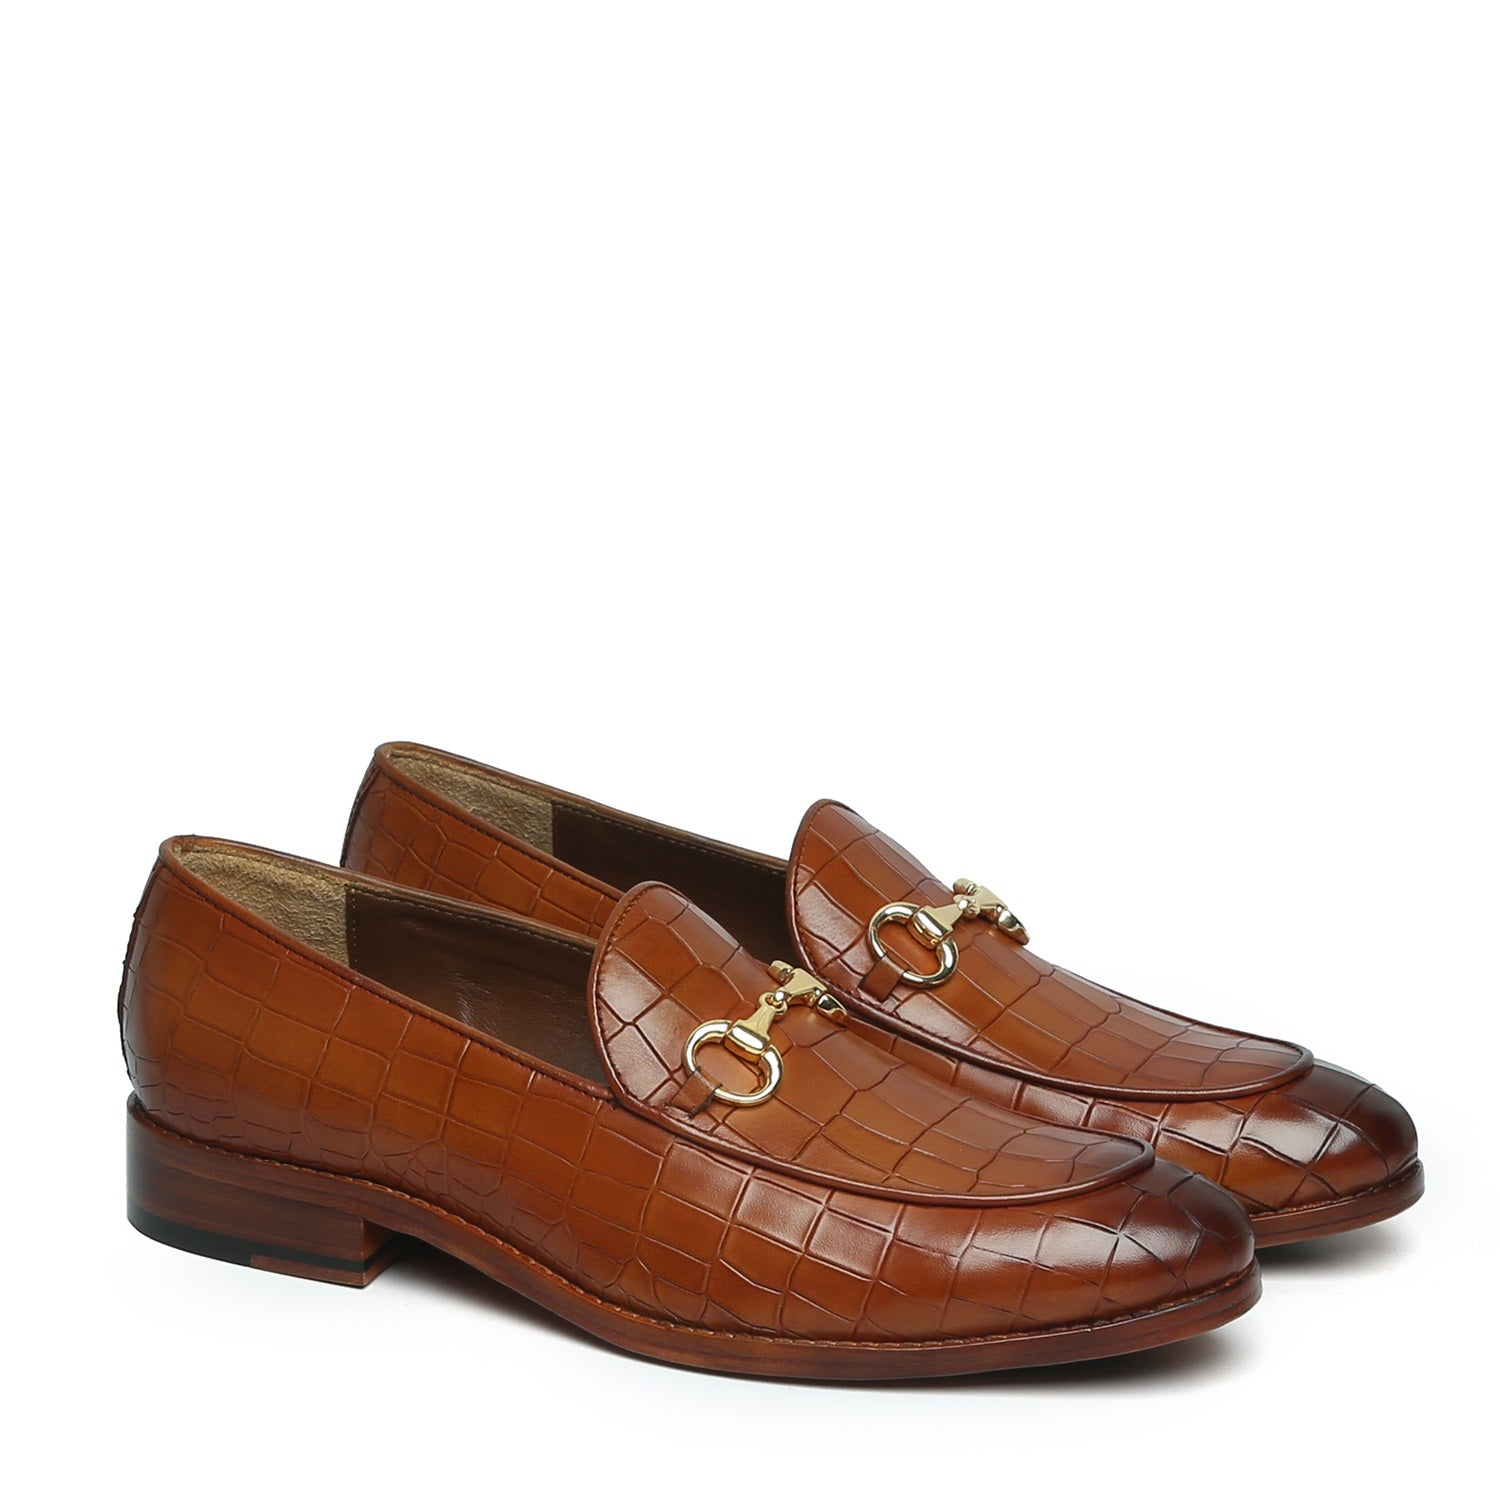 Tan Croco Textured Leather Loafer